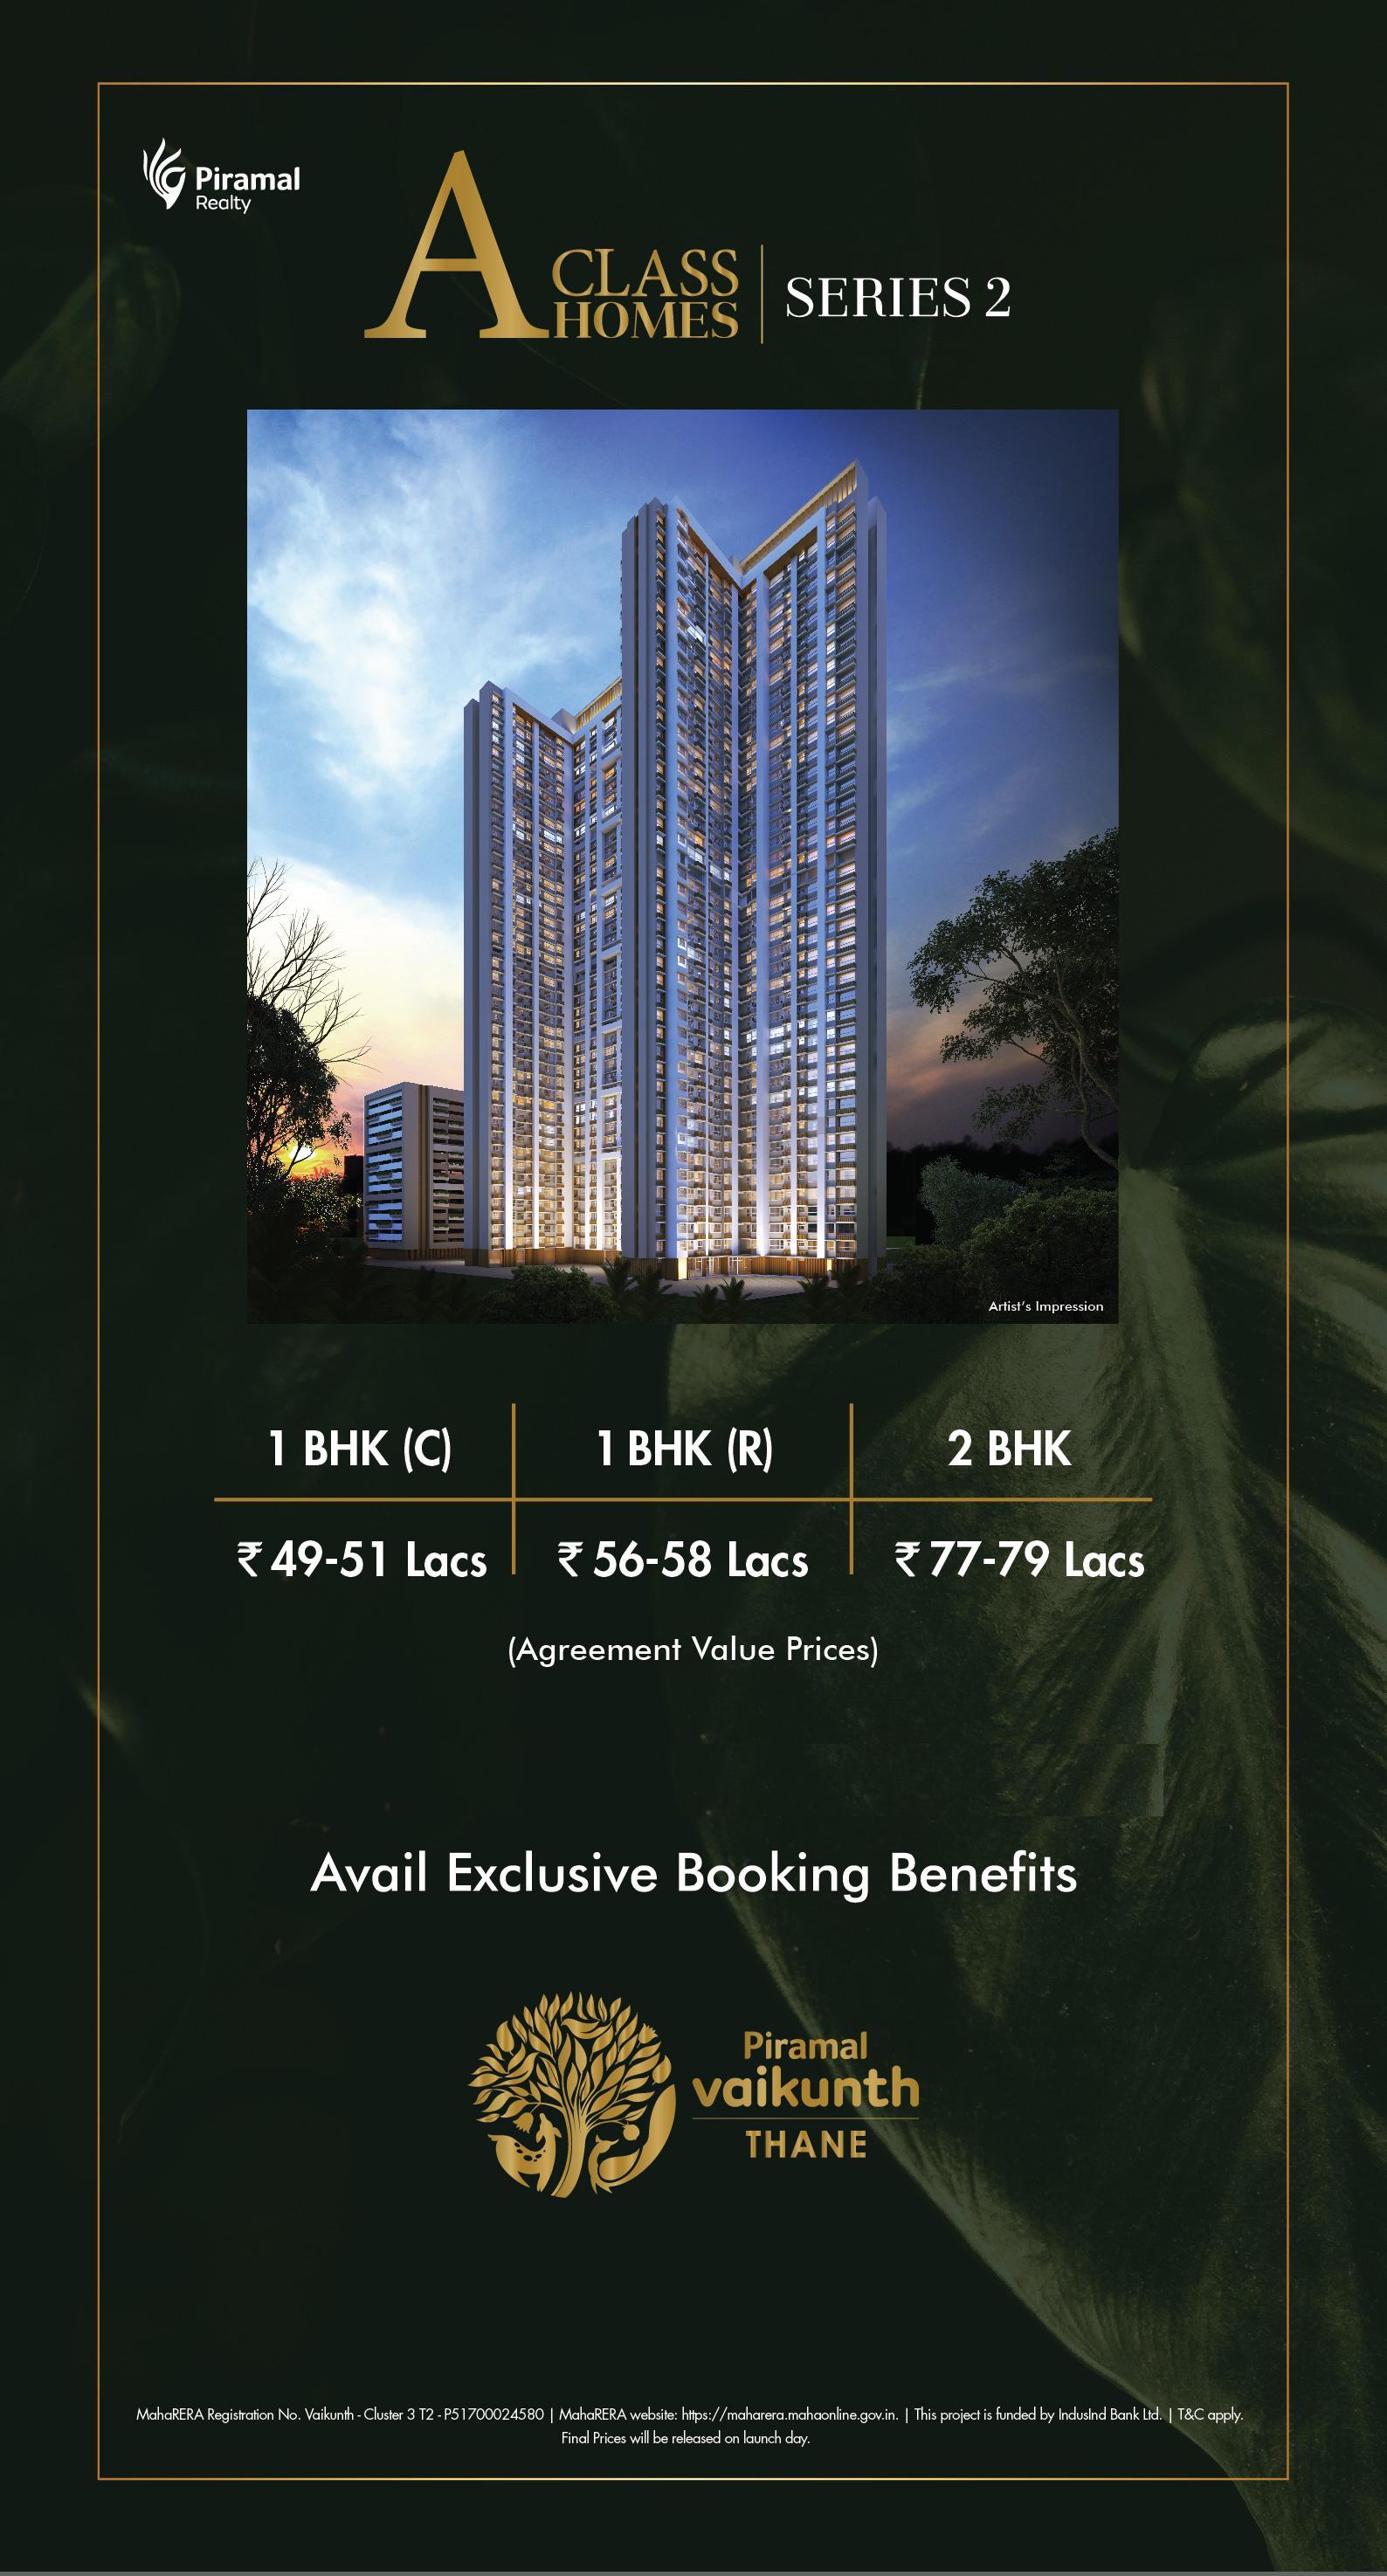 Piramal Vaikunth presents A Class Homes 1/2 BHK from 49 Lacs in Mumbai Update